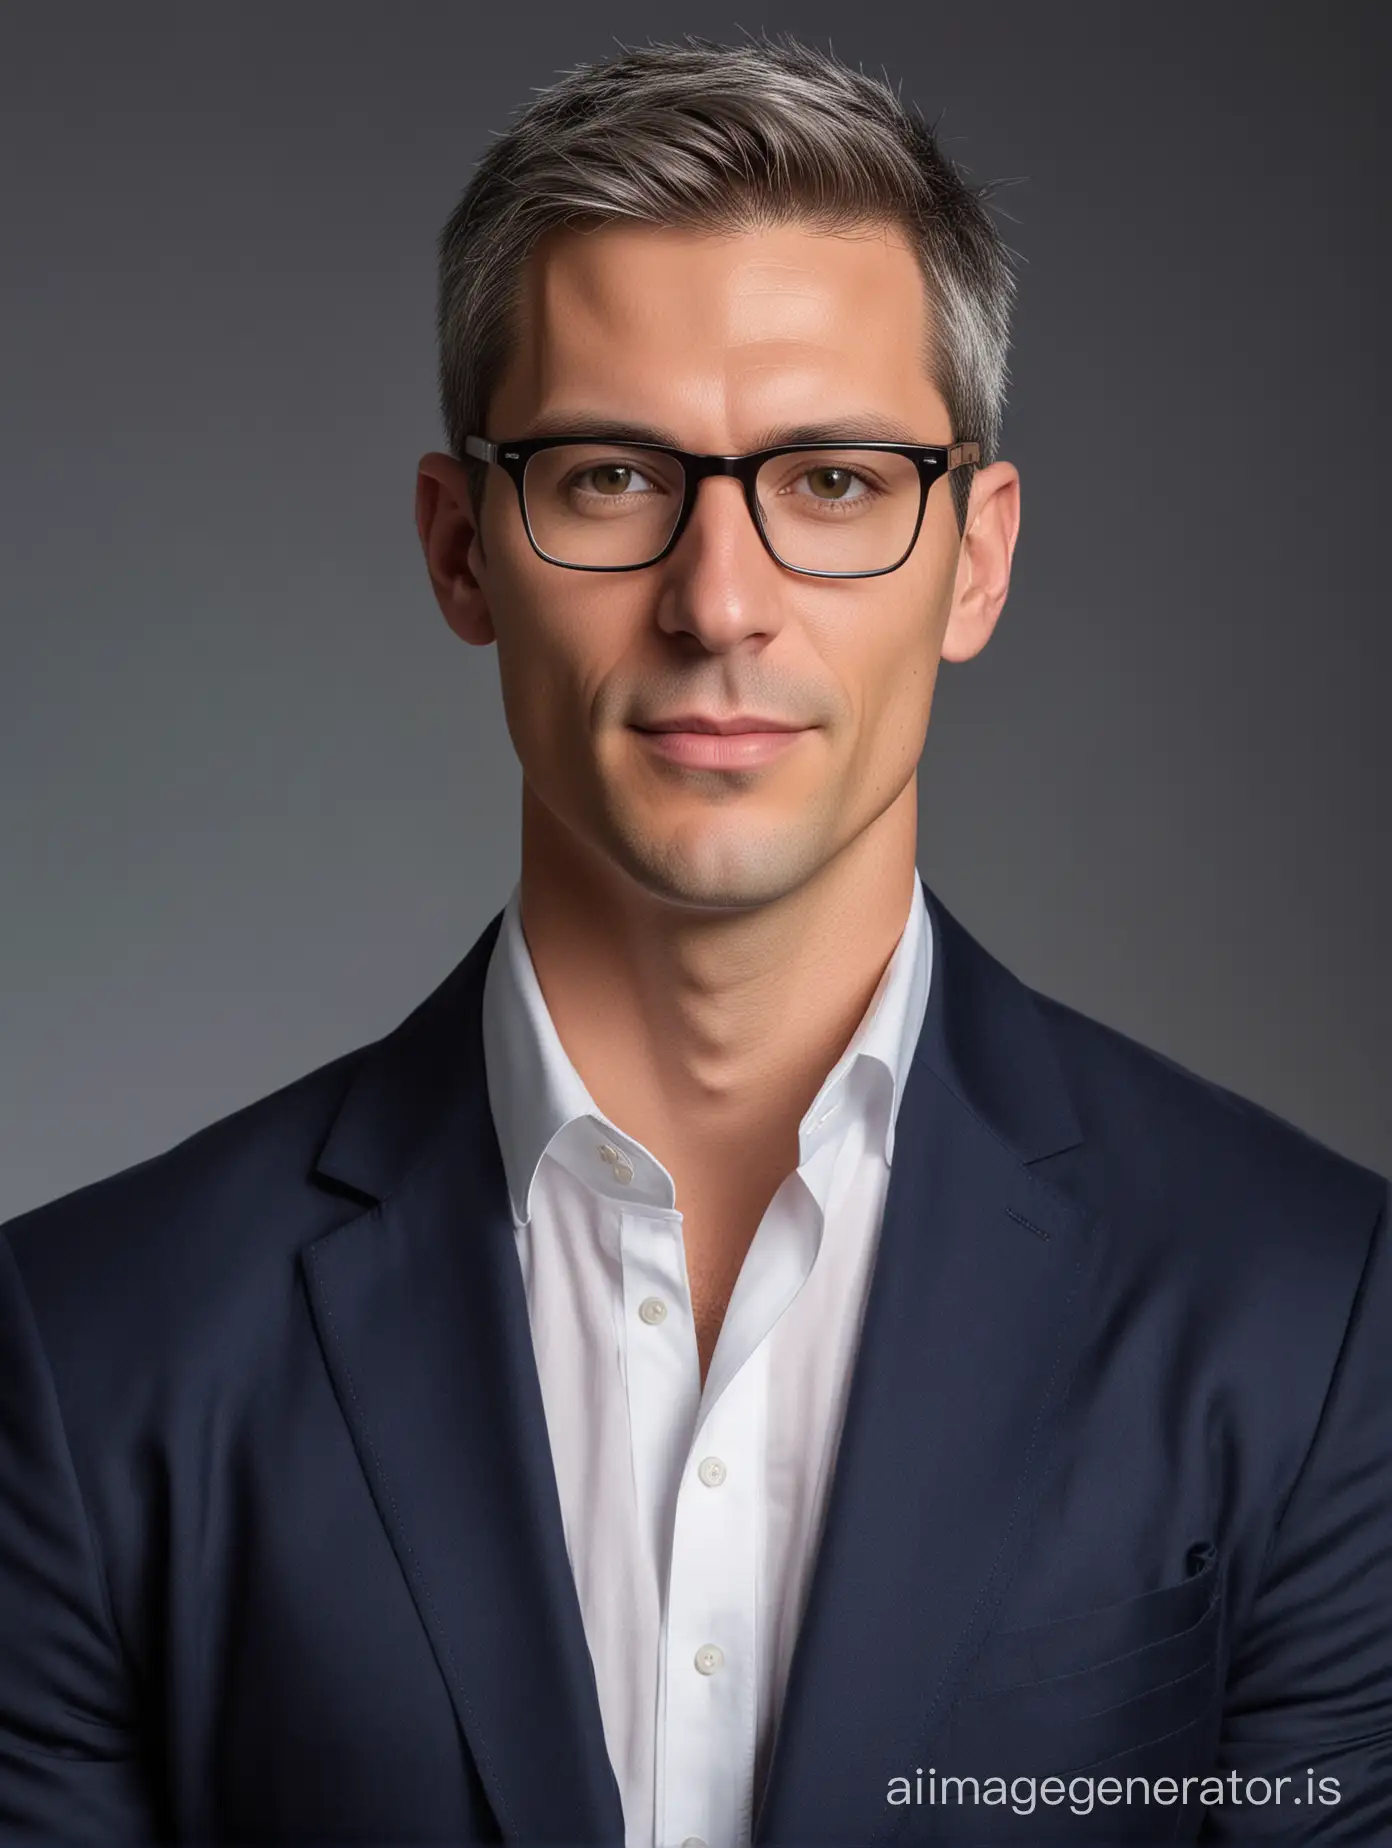 Professional portrait photo of a tall man, 35 years old, strong body, square face, with navy blue blazer, white shirt,  open collar, no tie, wearing glasses, shaved gray hair